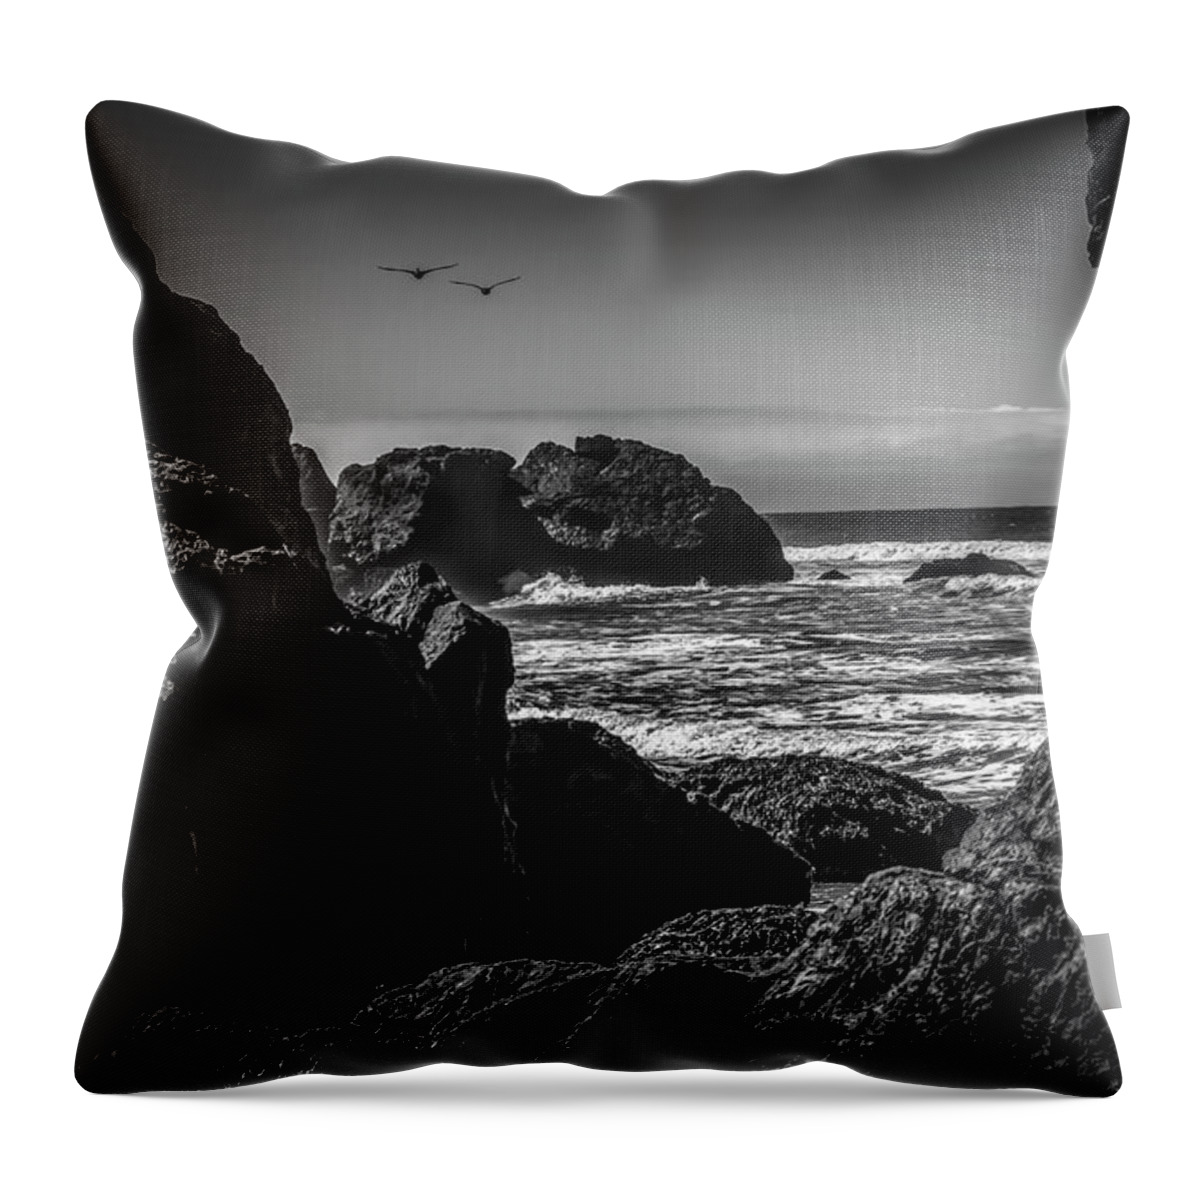 Formation Throw Pillow featuring the photograph Geese Attack by Bruce Bottomley